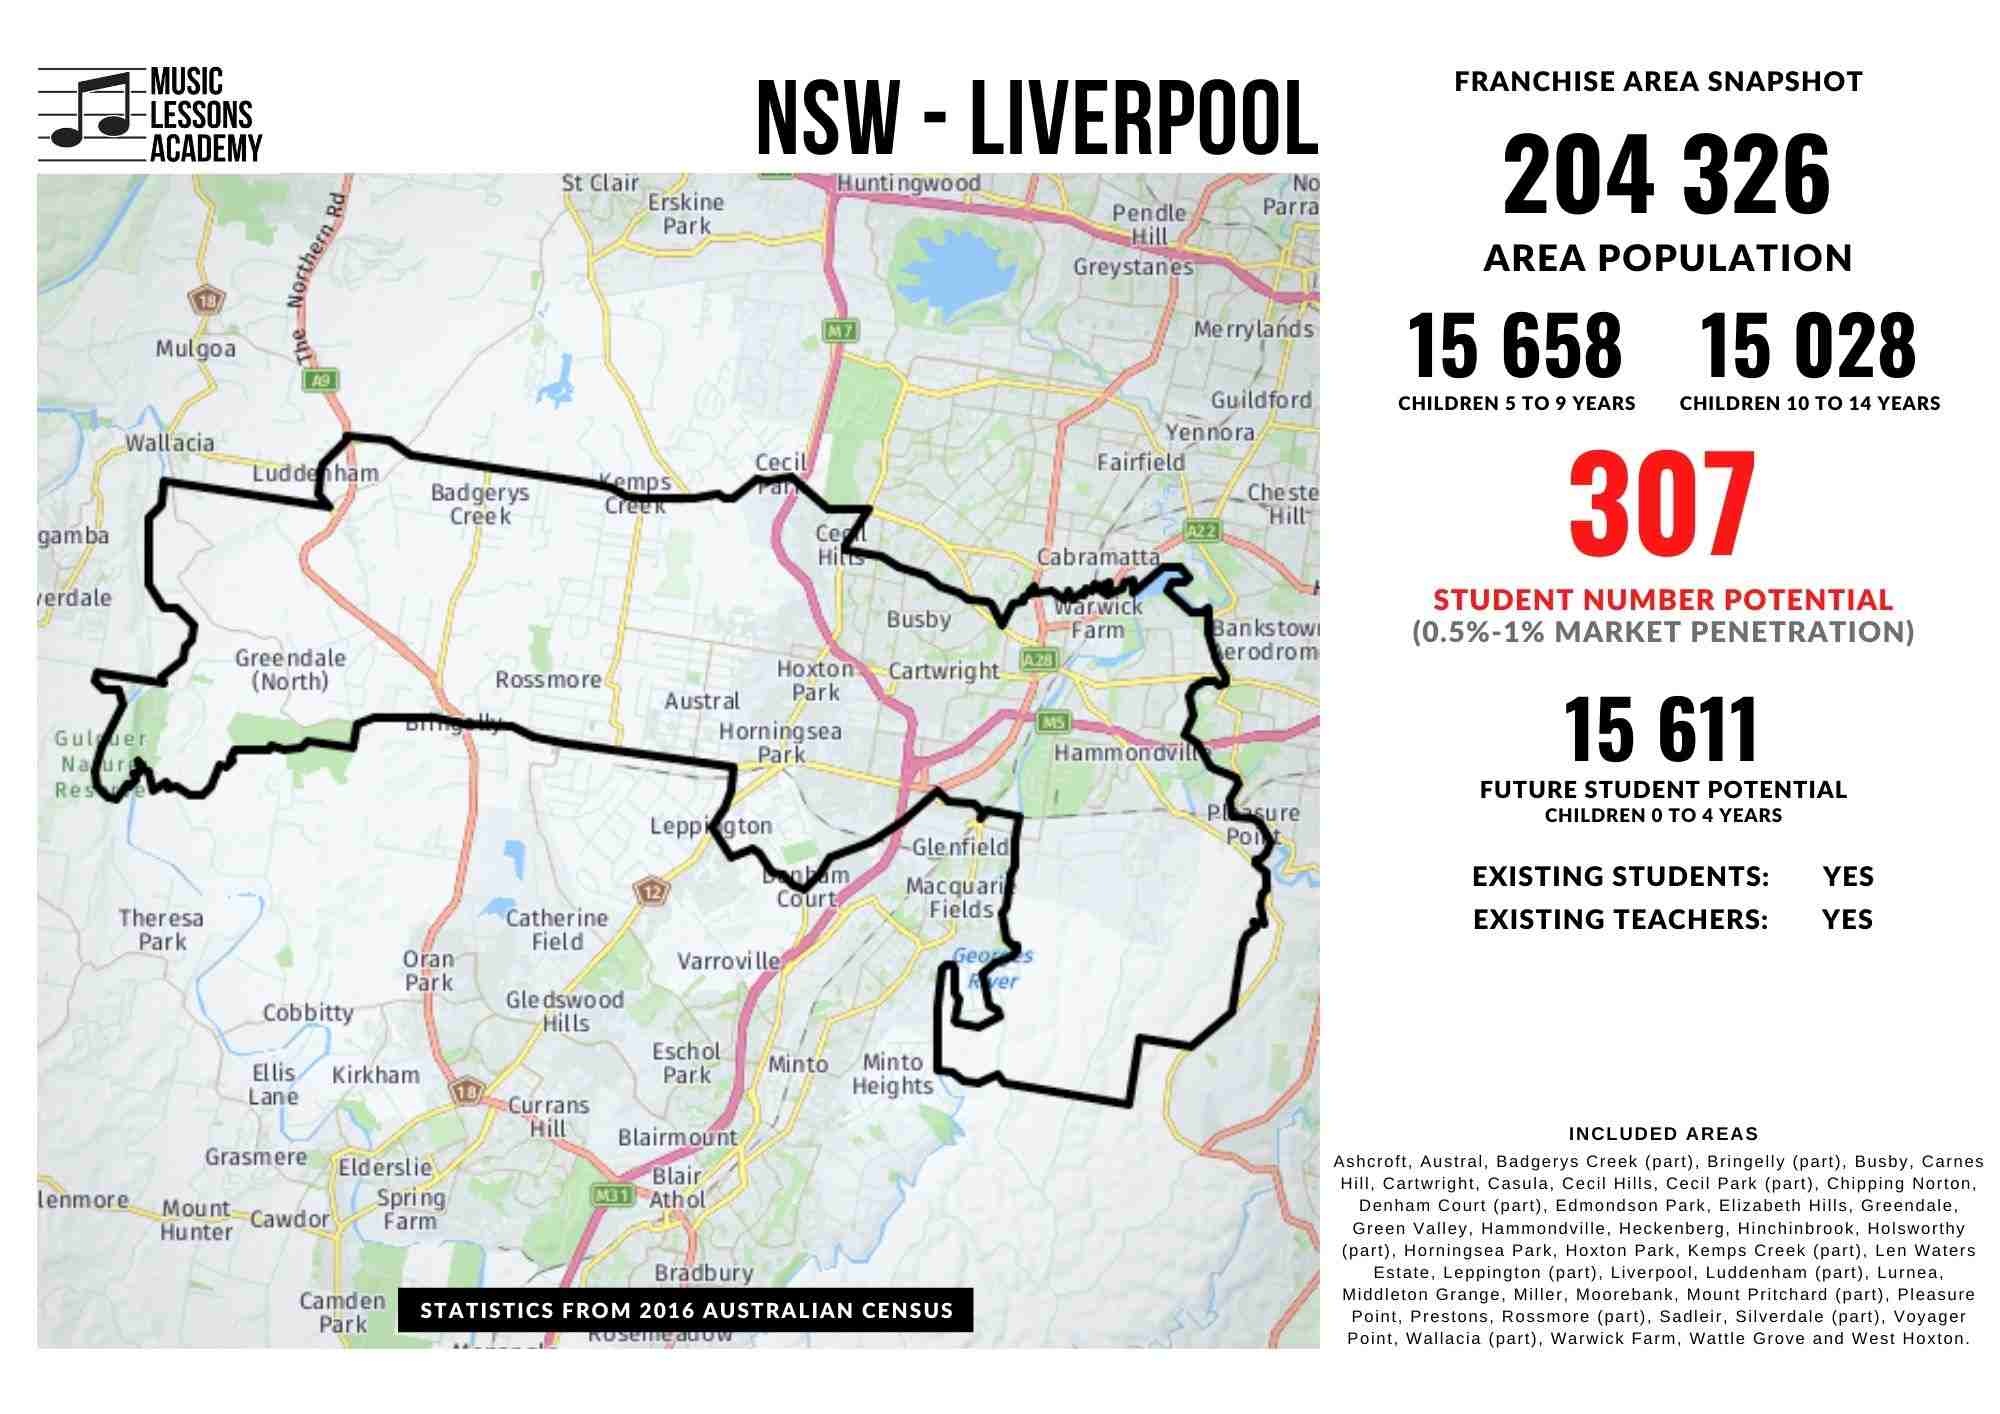 NSW Liverpool Franchise for sale